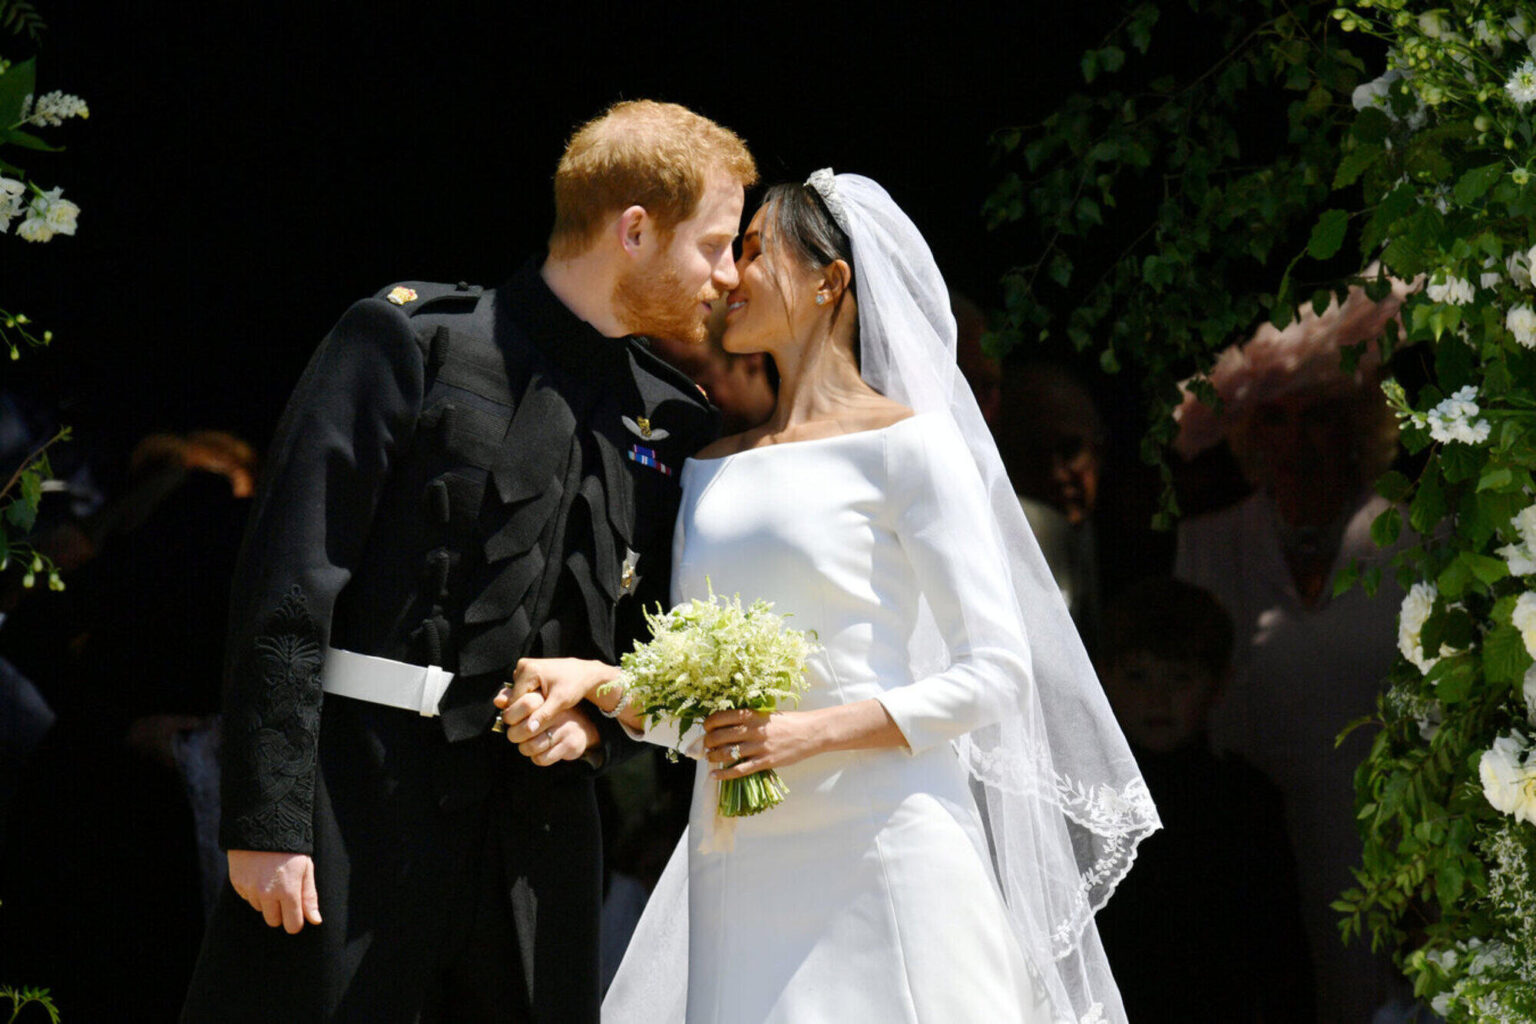 Prince Harry and Meghan Markle told the world that they had a secret wedding! But did they? Royal experts disagree. Here's the details their special day.